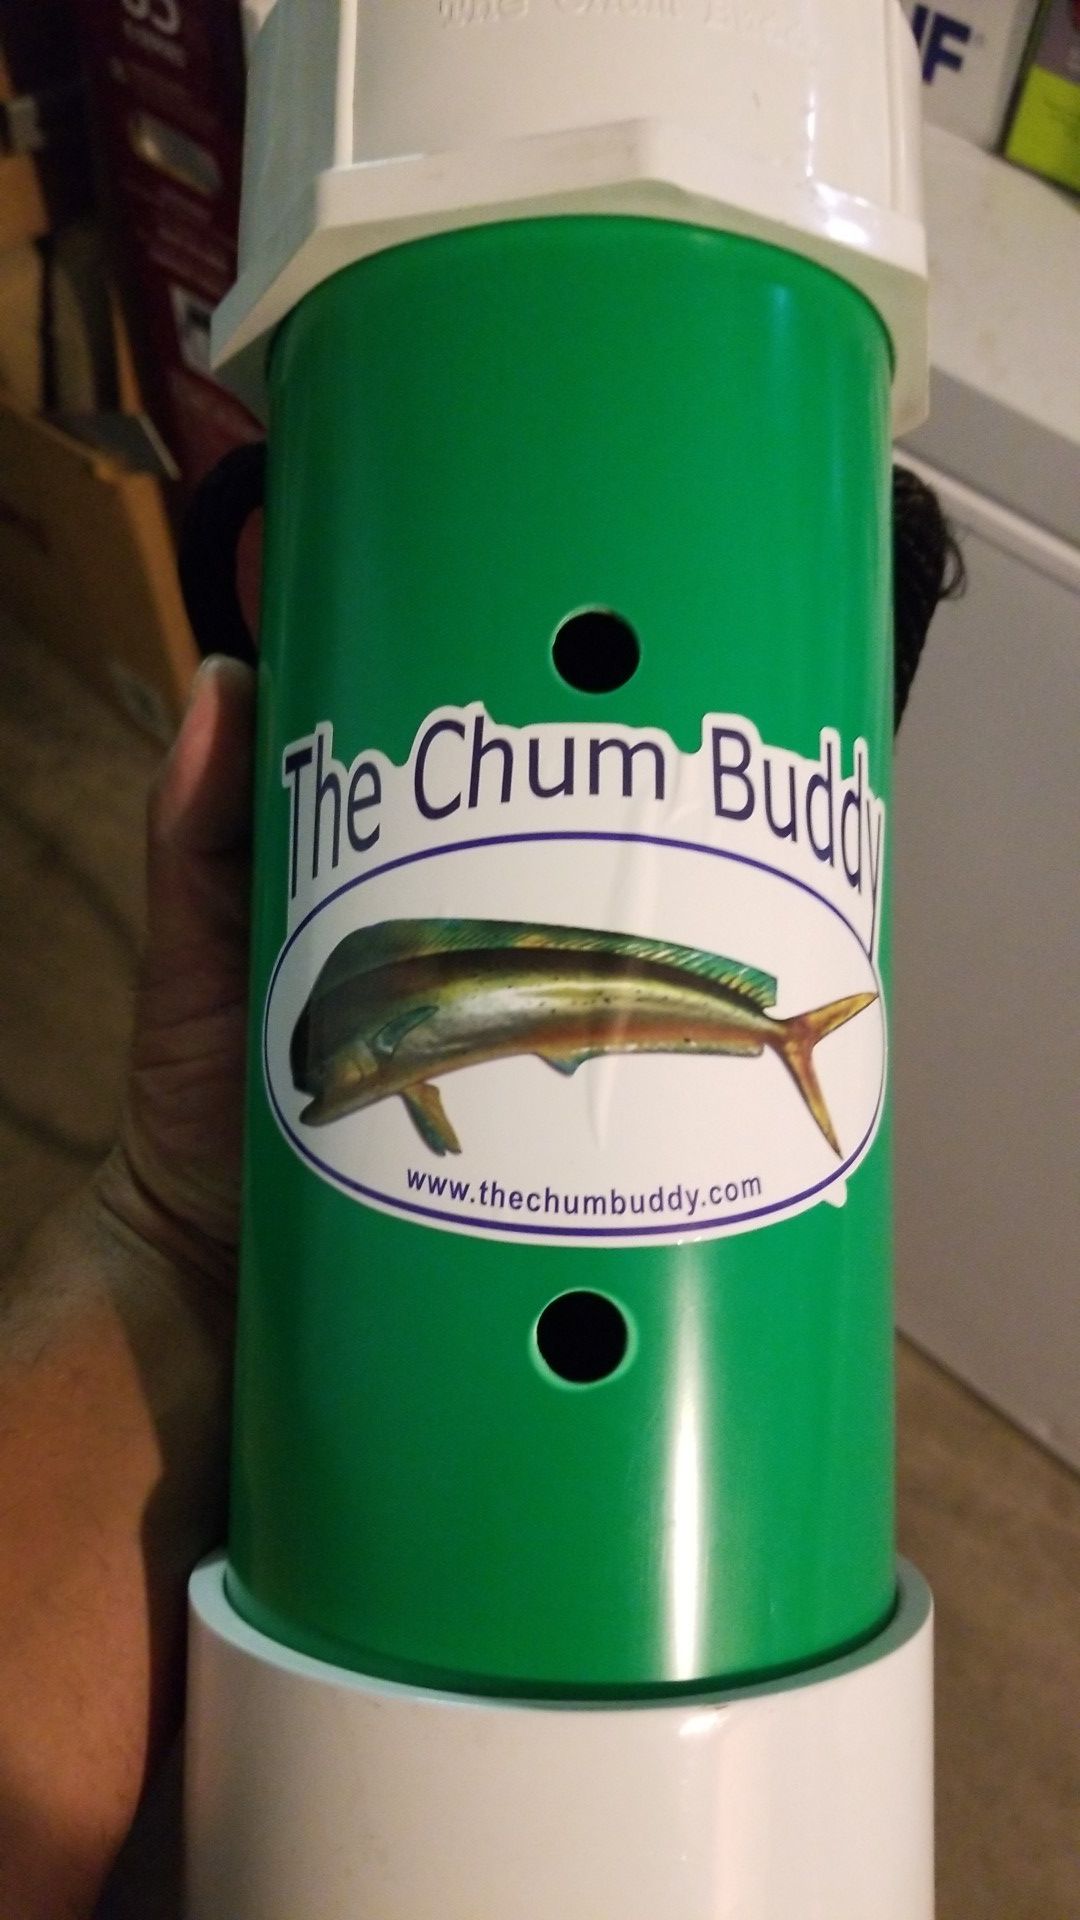 The Chum Buddy tool for Chuming Chum for Fishing Saltwater or Freshwater Brand New